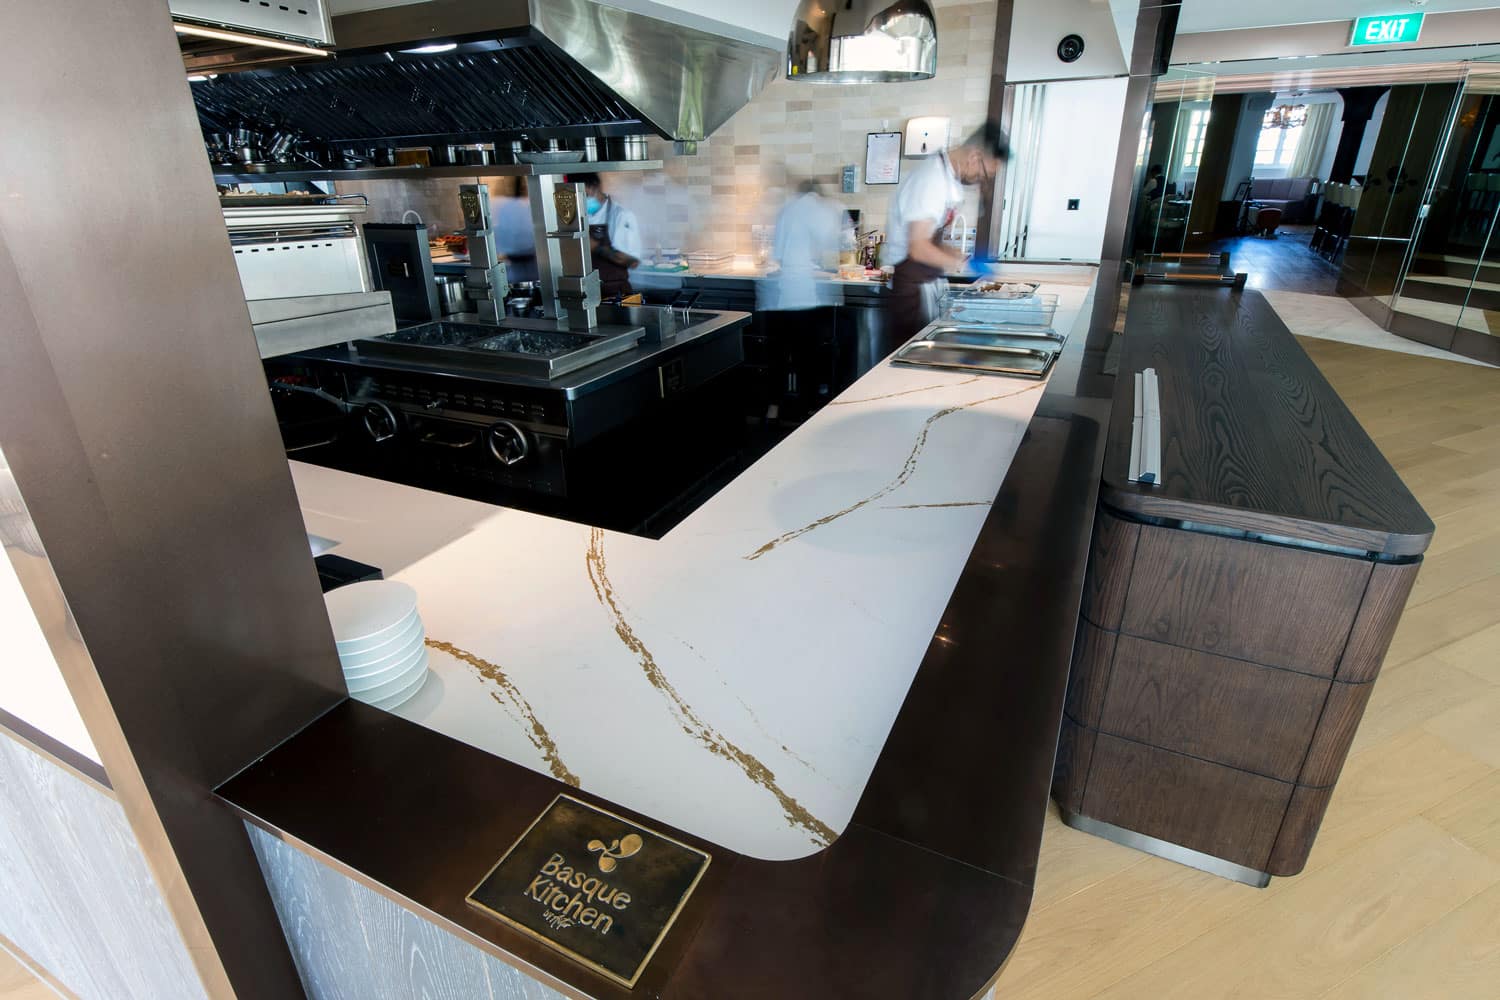 Image of Basque Kitchen 2 in Silestone, selected for the worktop of the Hyatt Regency’s demanding dining room for its extraordinary hygienic capabilities - Cosentino